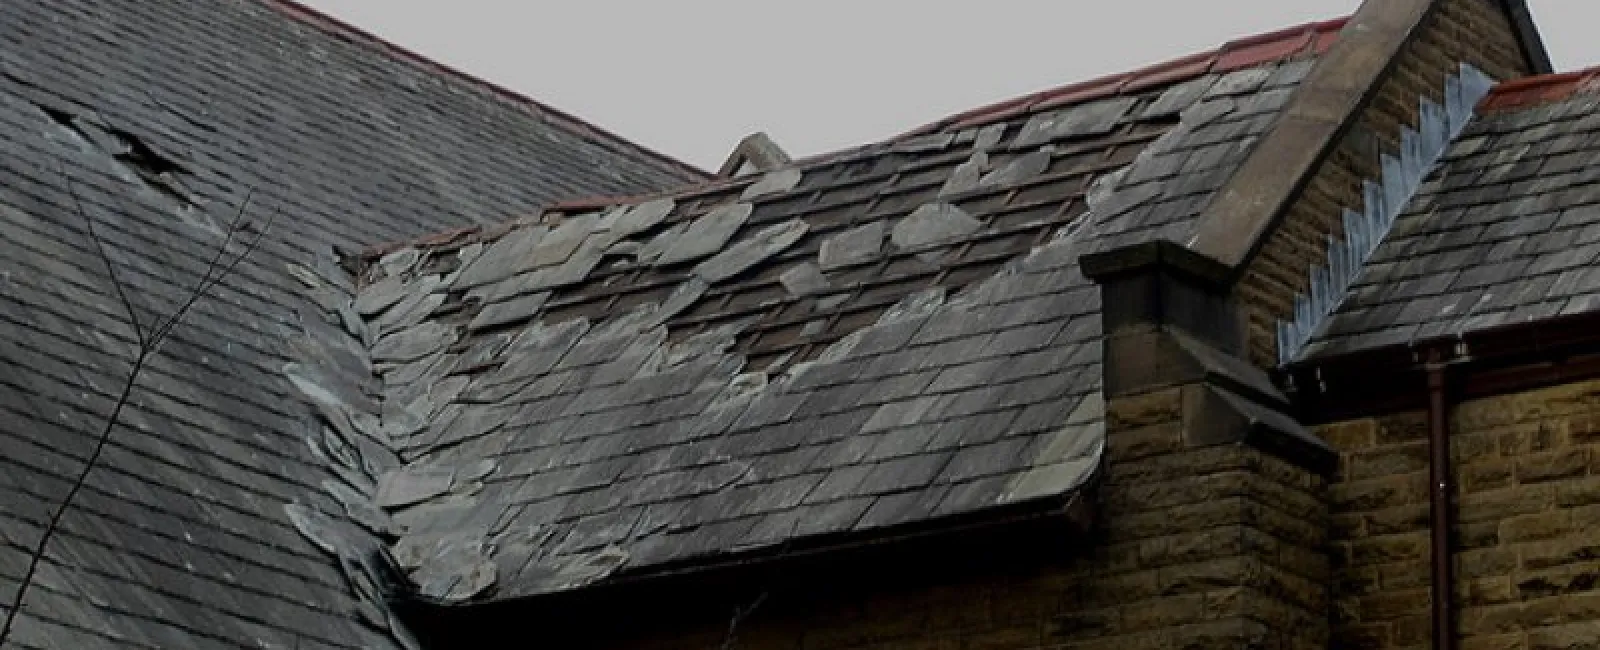 Protecting Your Roof: The Top 3 Most Damaging Debris